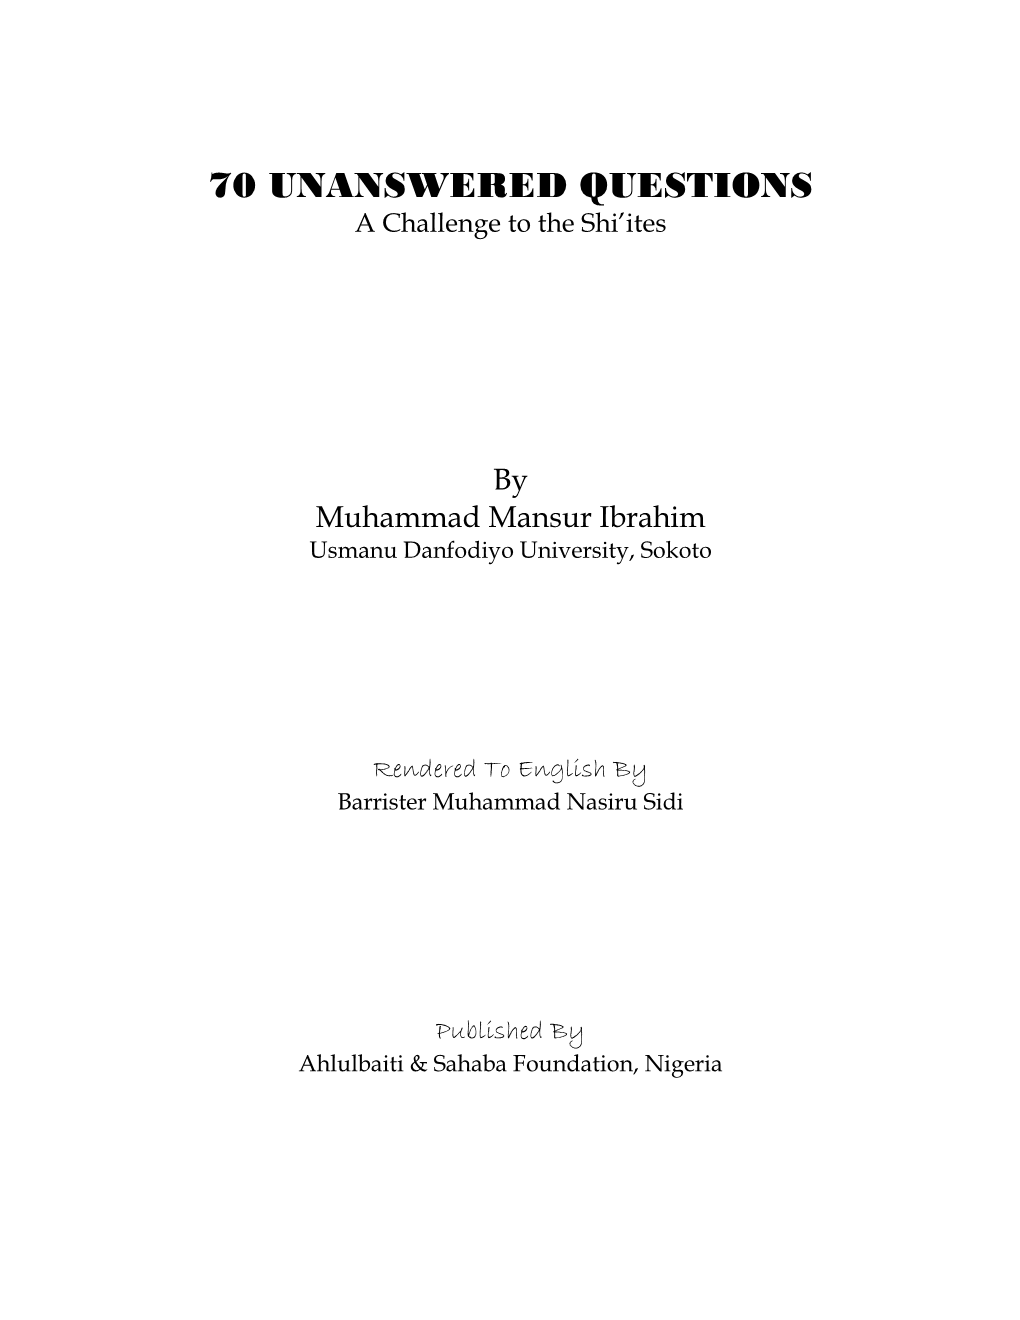 70 UNANSWERED QUESTIONS to Shia